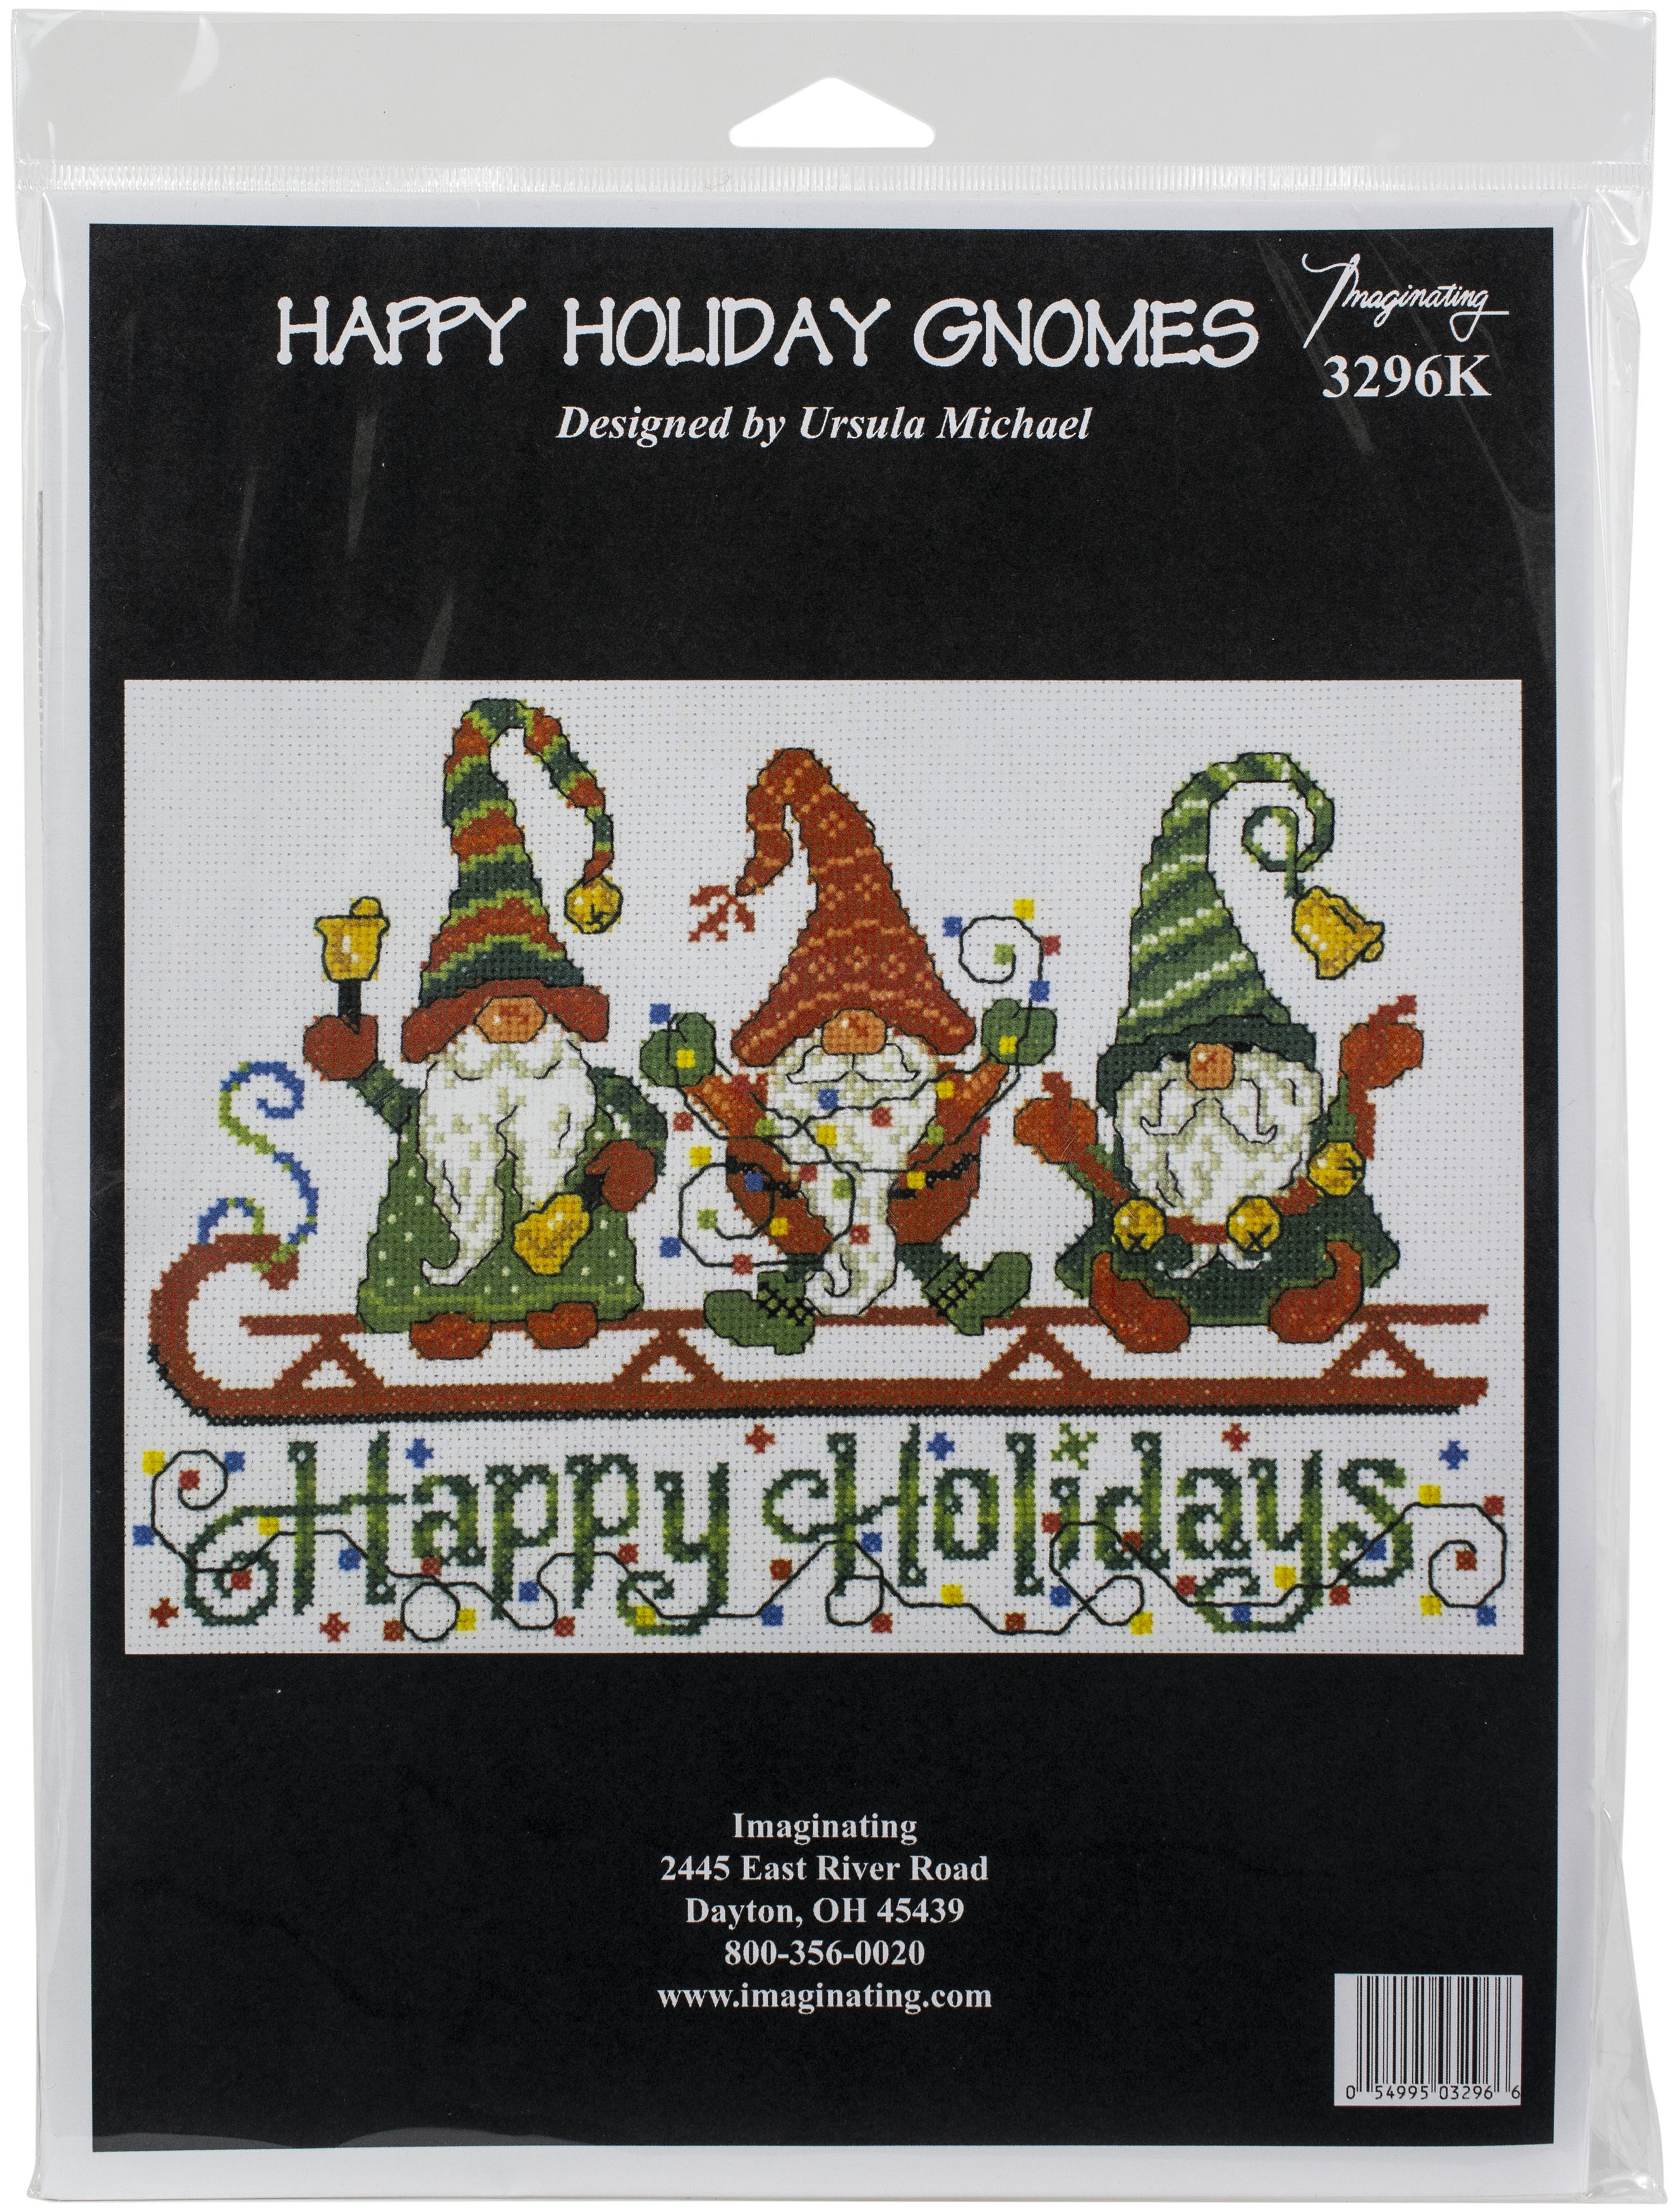 Happy Holiday Gnomes Counted Cross Stitch Kit by Imaginating Cross Stitch